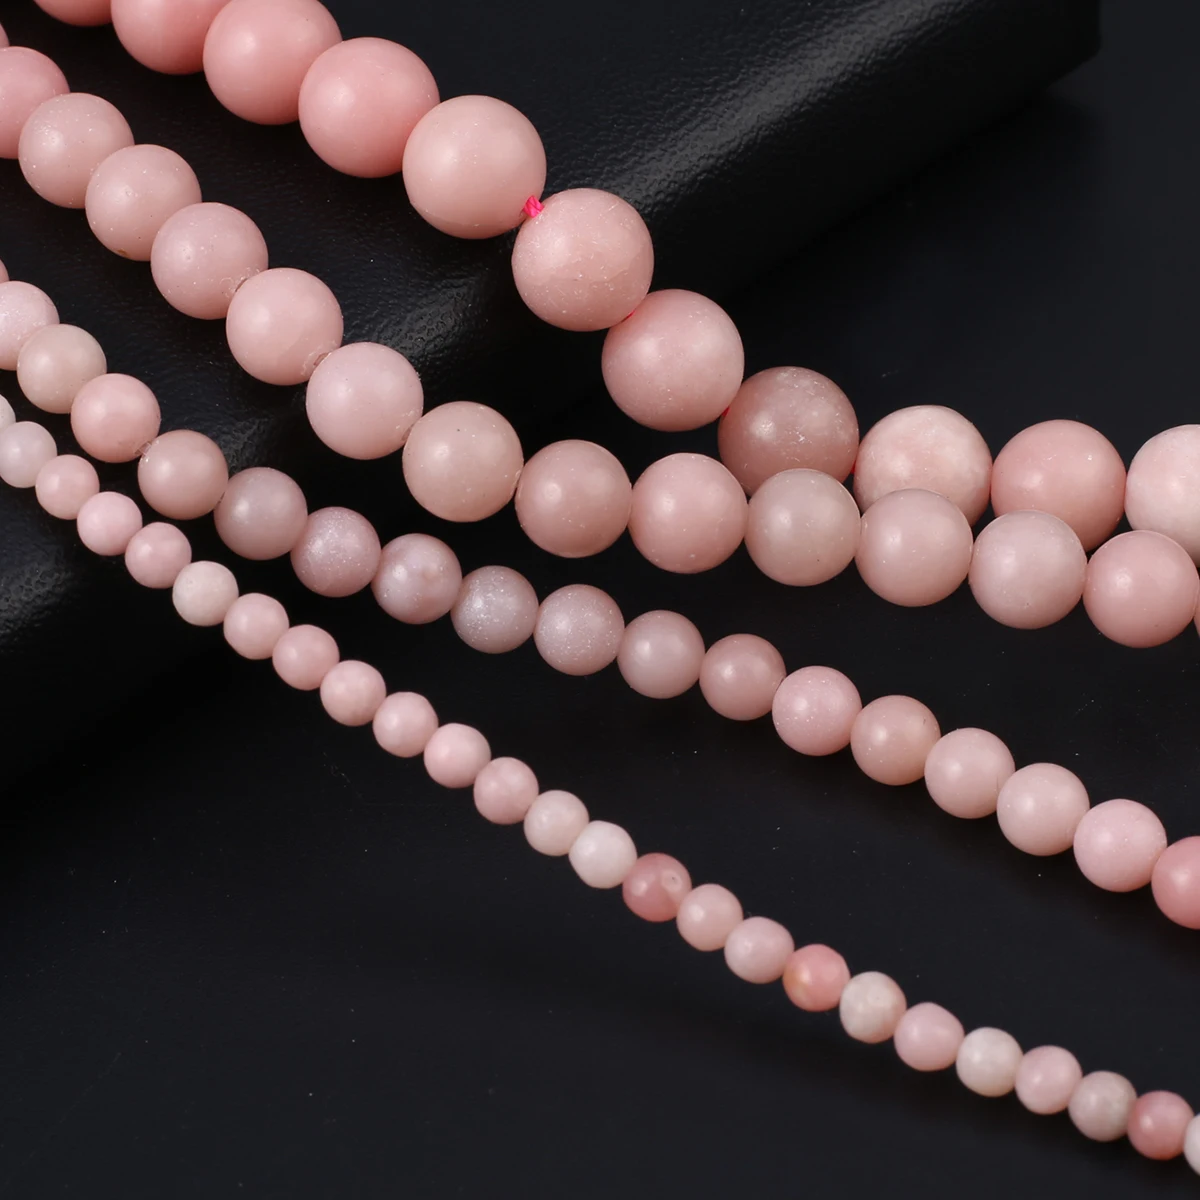 

Natural Genuine Pink Opal Stone Beads Round Loose Spacer Beads for Jewelry Making DIY Bracelet Charms Accessories 4/6/8/10mm